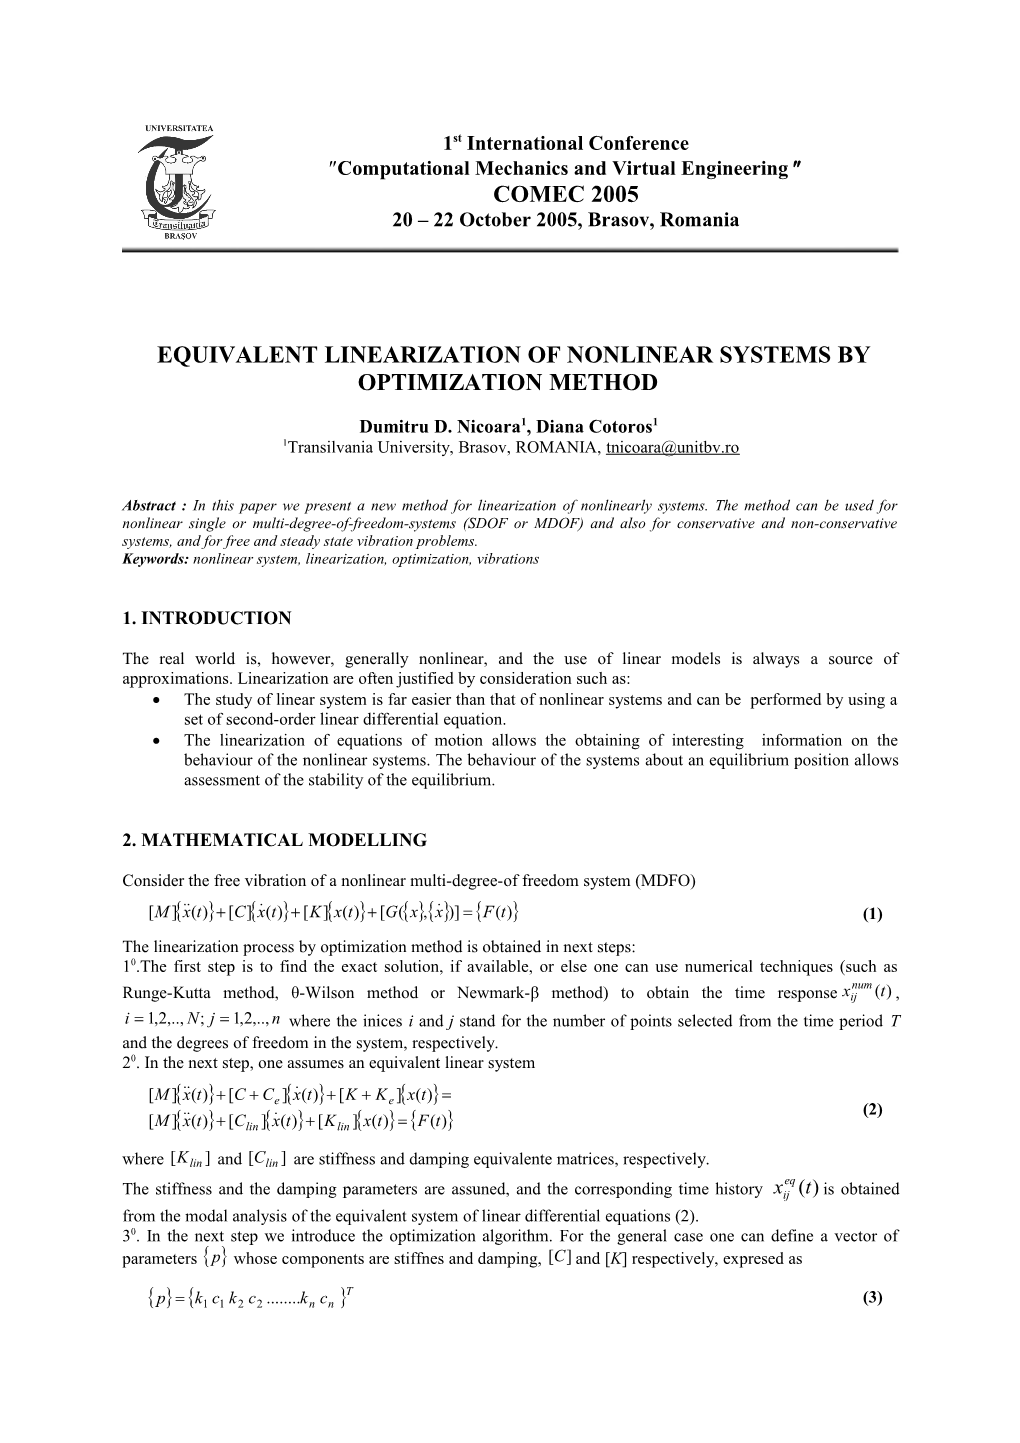 Equivalent Linearization of Nonlinear Systems by Optimization Method